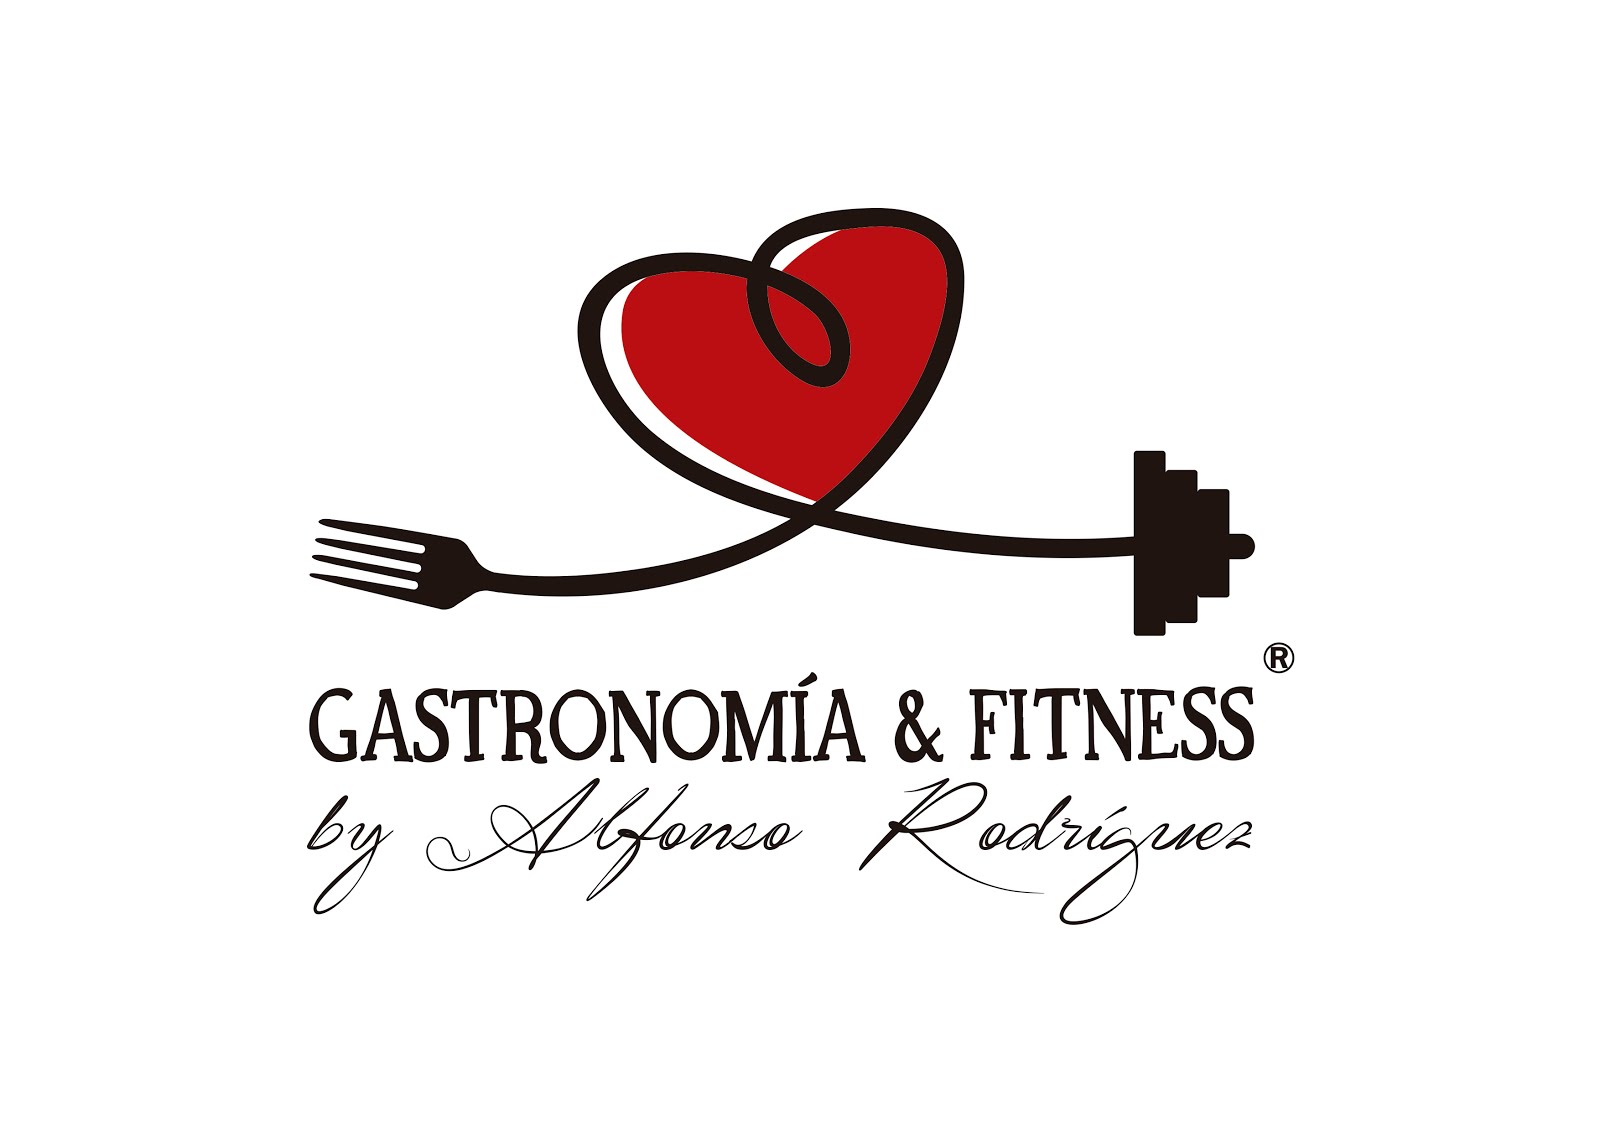 GASTRONOMÍA & FITNESS by Alfonso Rodriguez